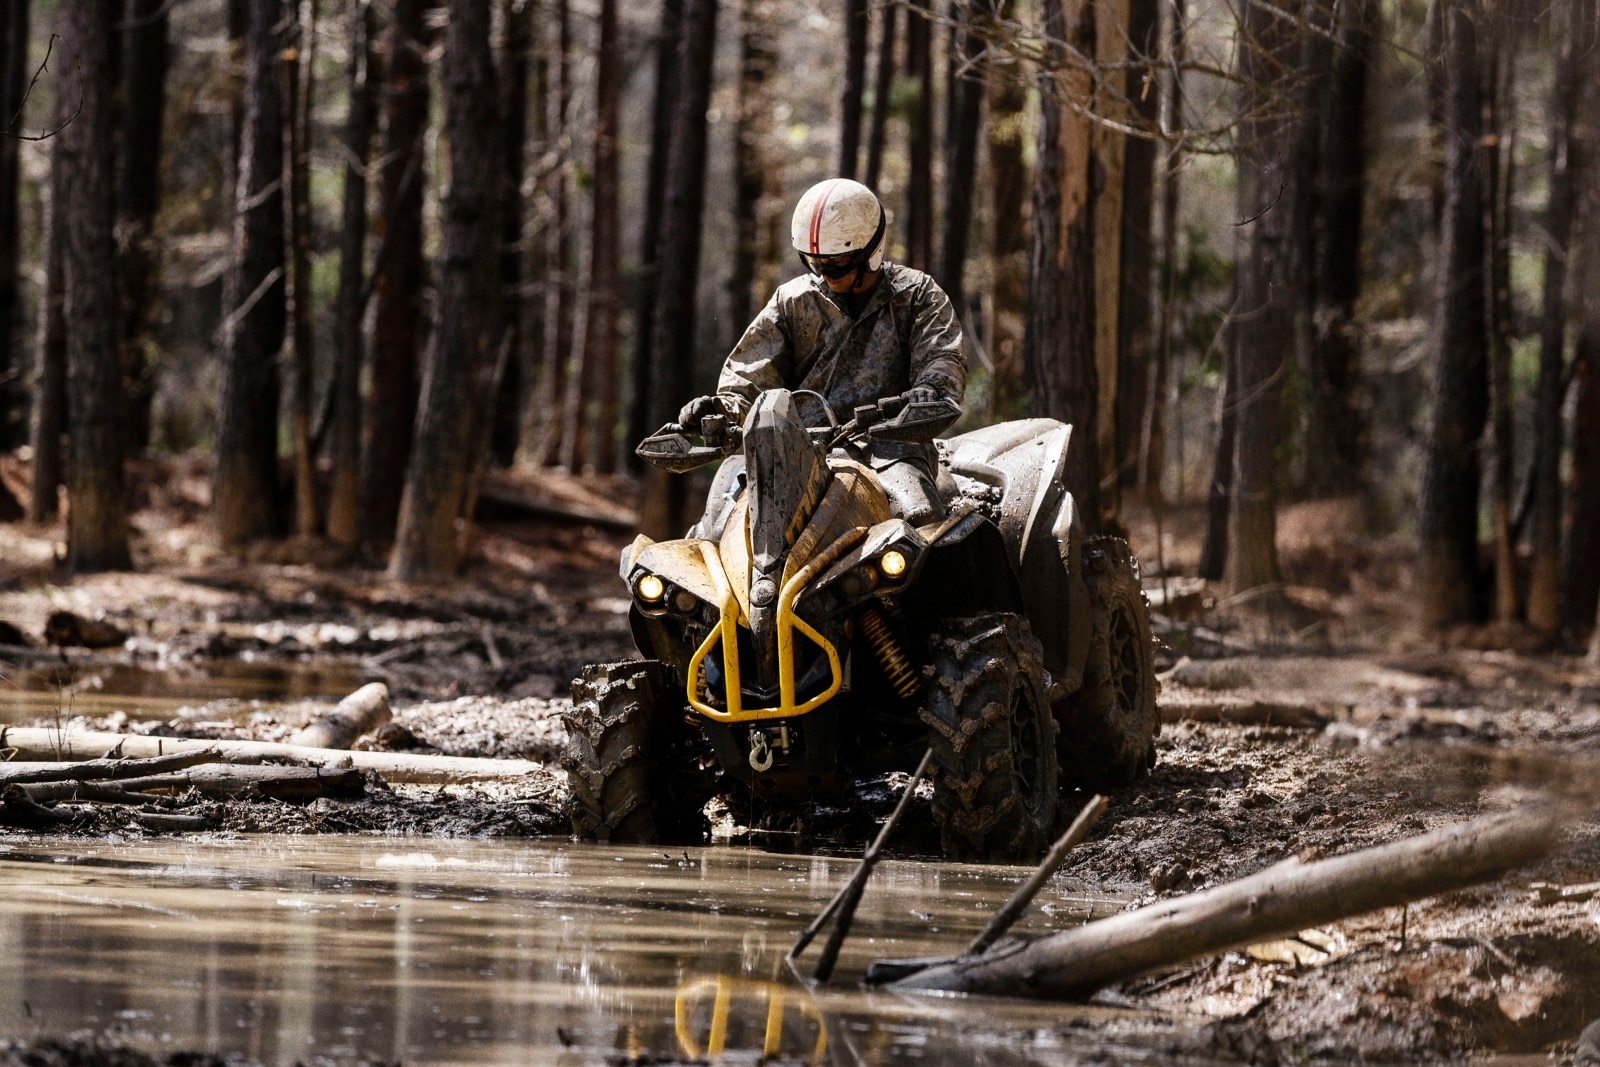 A man driving a Can-Am Renegade X mr 1000 in the mud